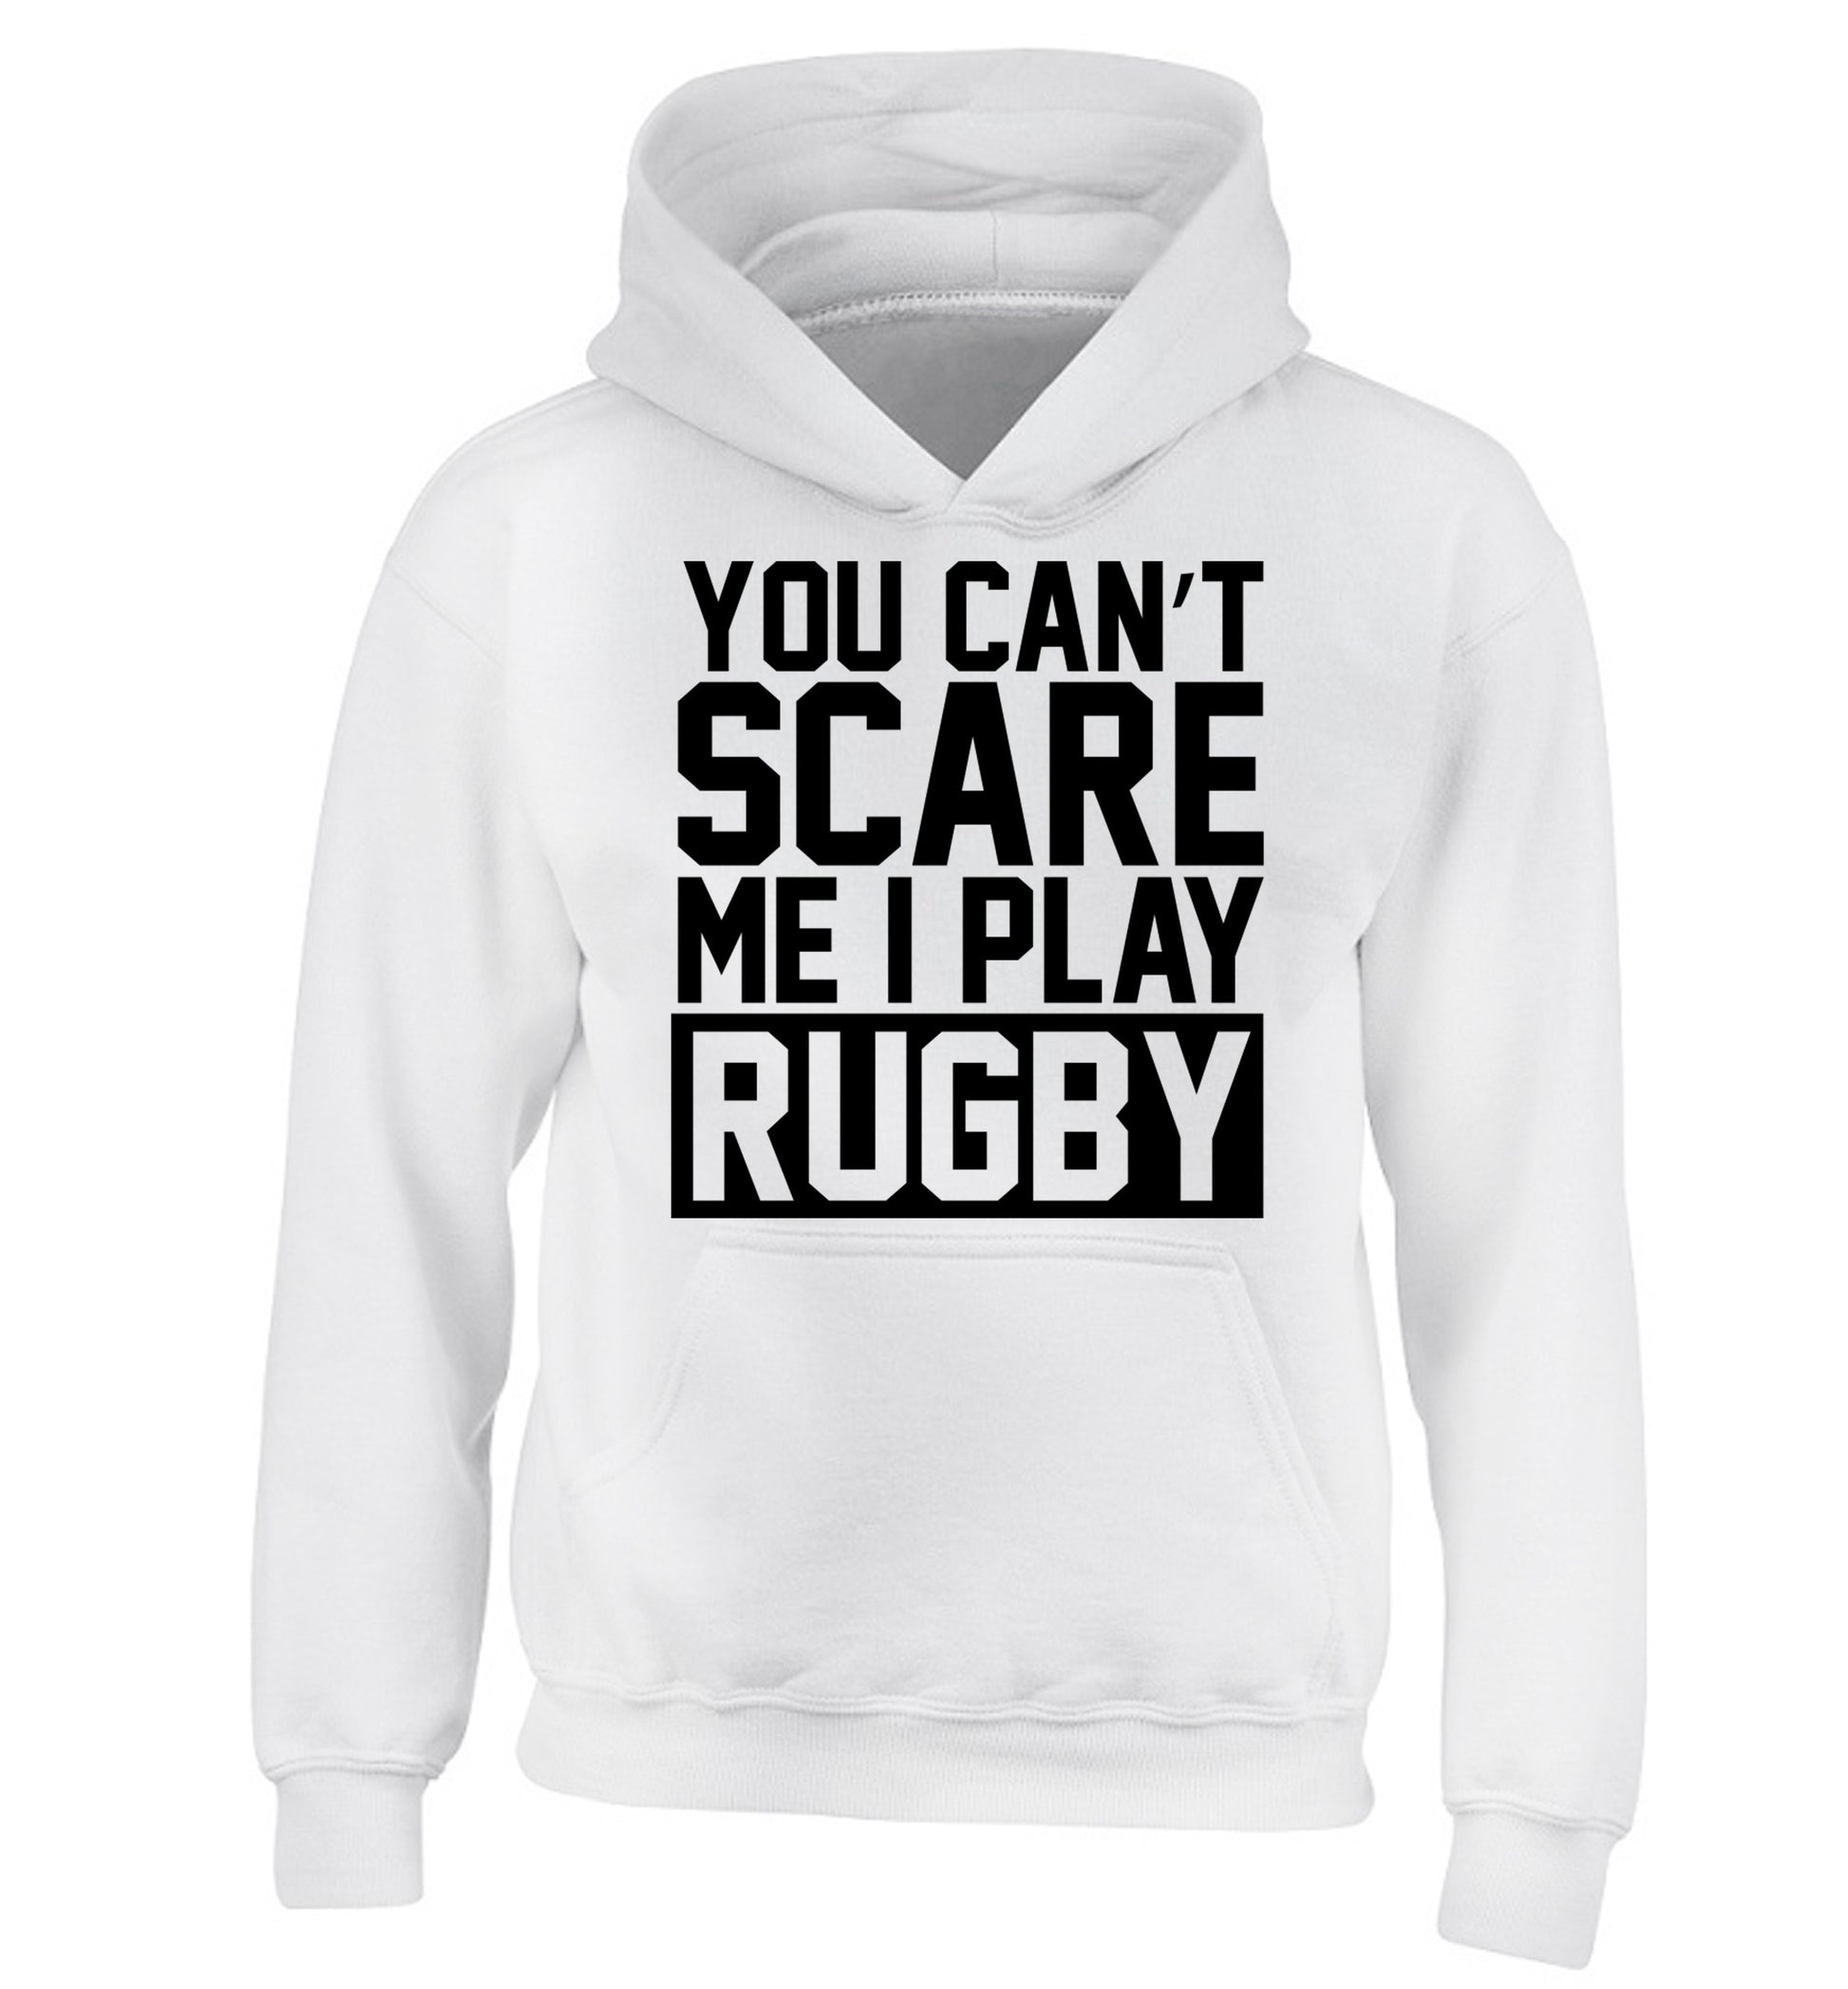 You can't scare me I play rugby children's white hoodie 12-14 Years